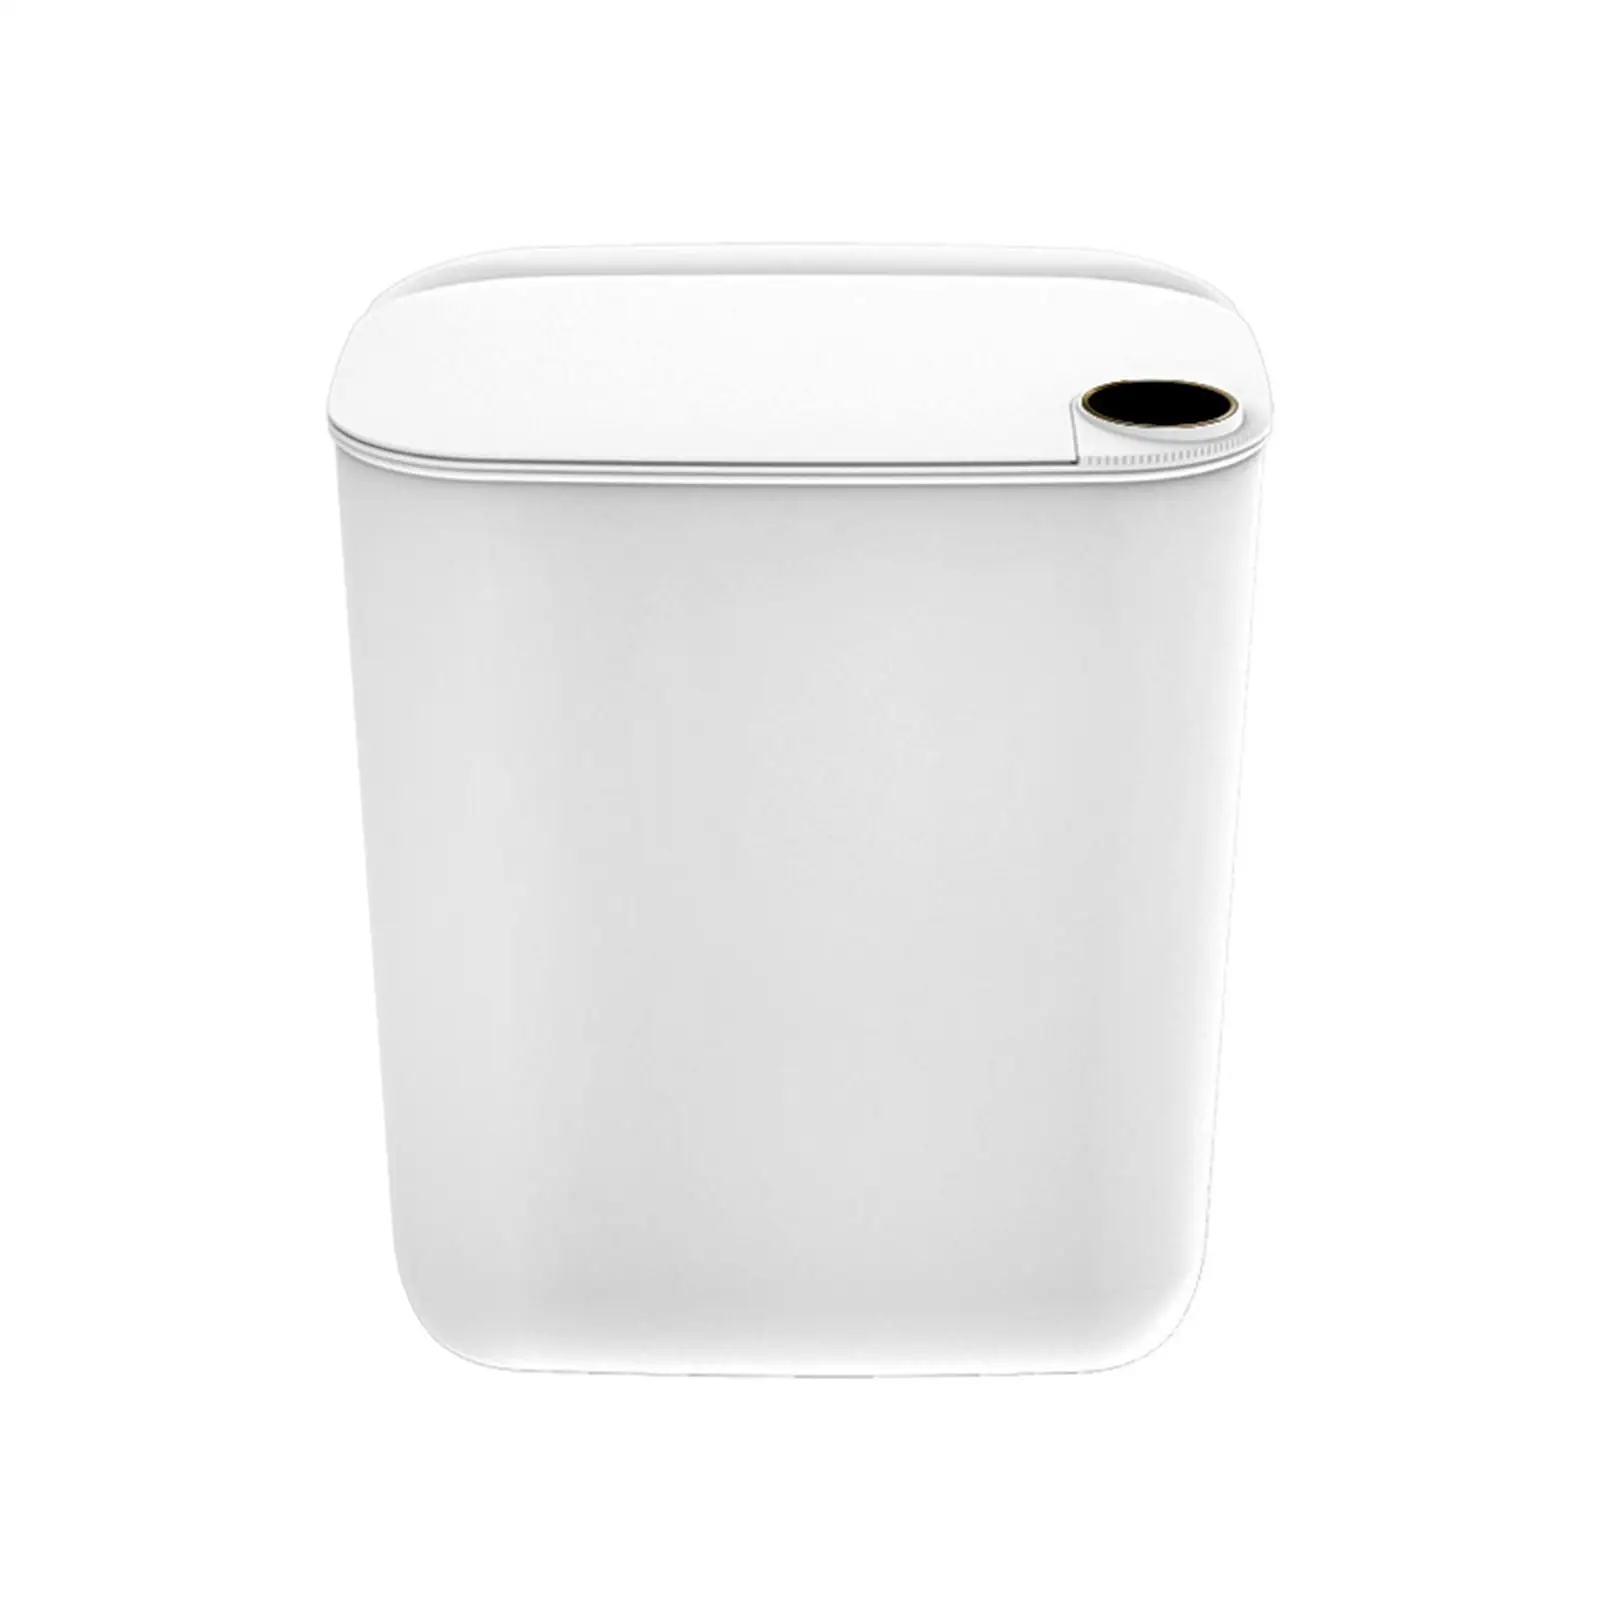 Sensor Trash Can Touchless Smart Induction Garbage Bucket Rubbish Trash Can Waste Bins for Hotel Kitchen Home Toilet Fitments